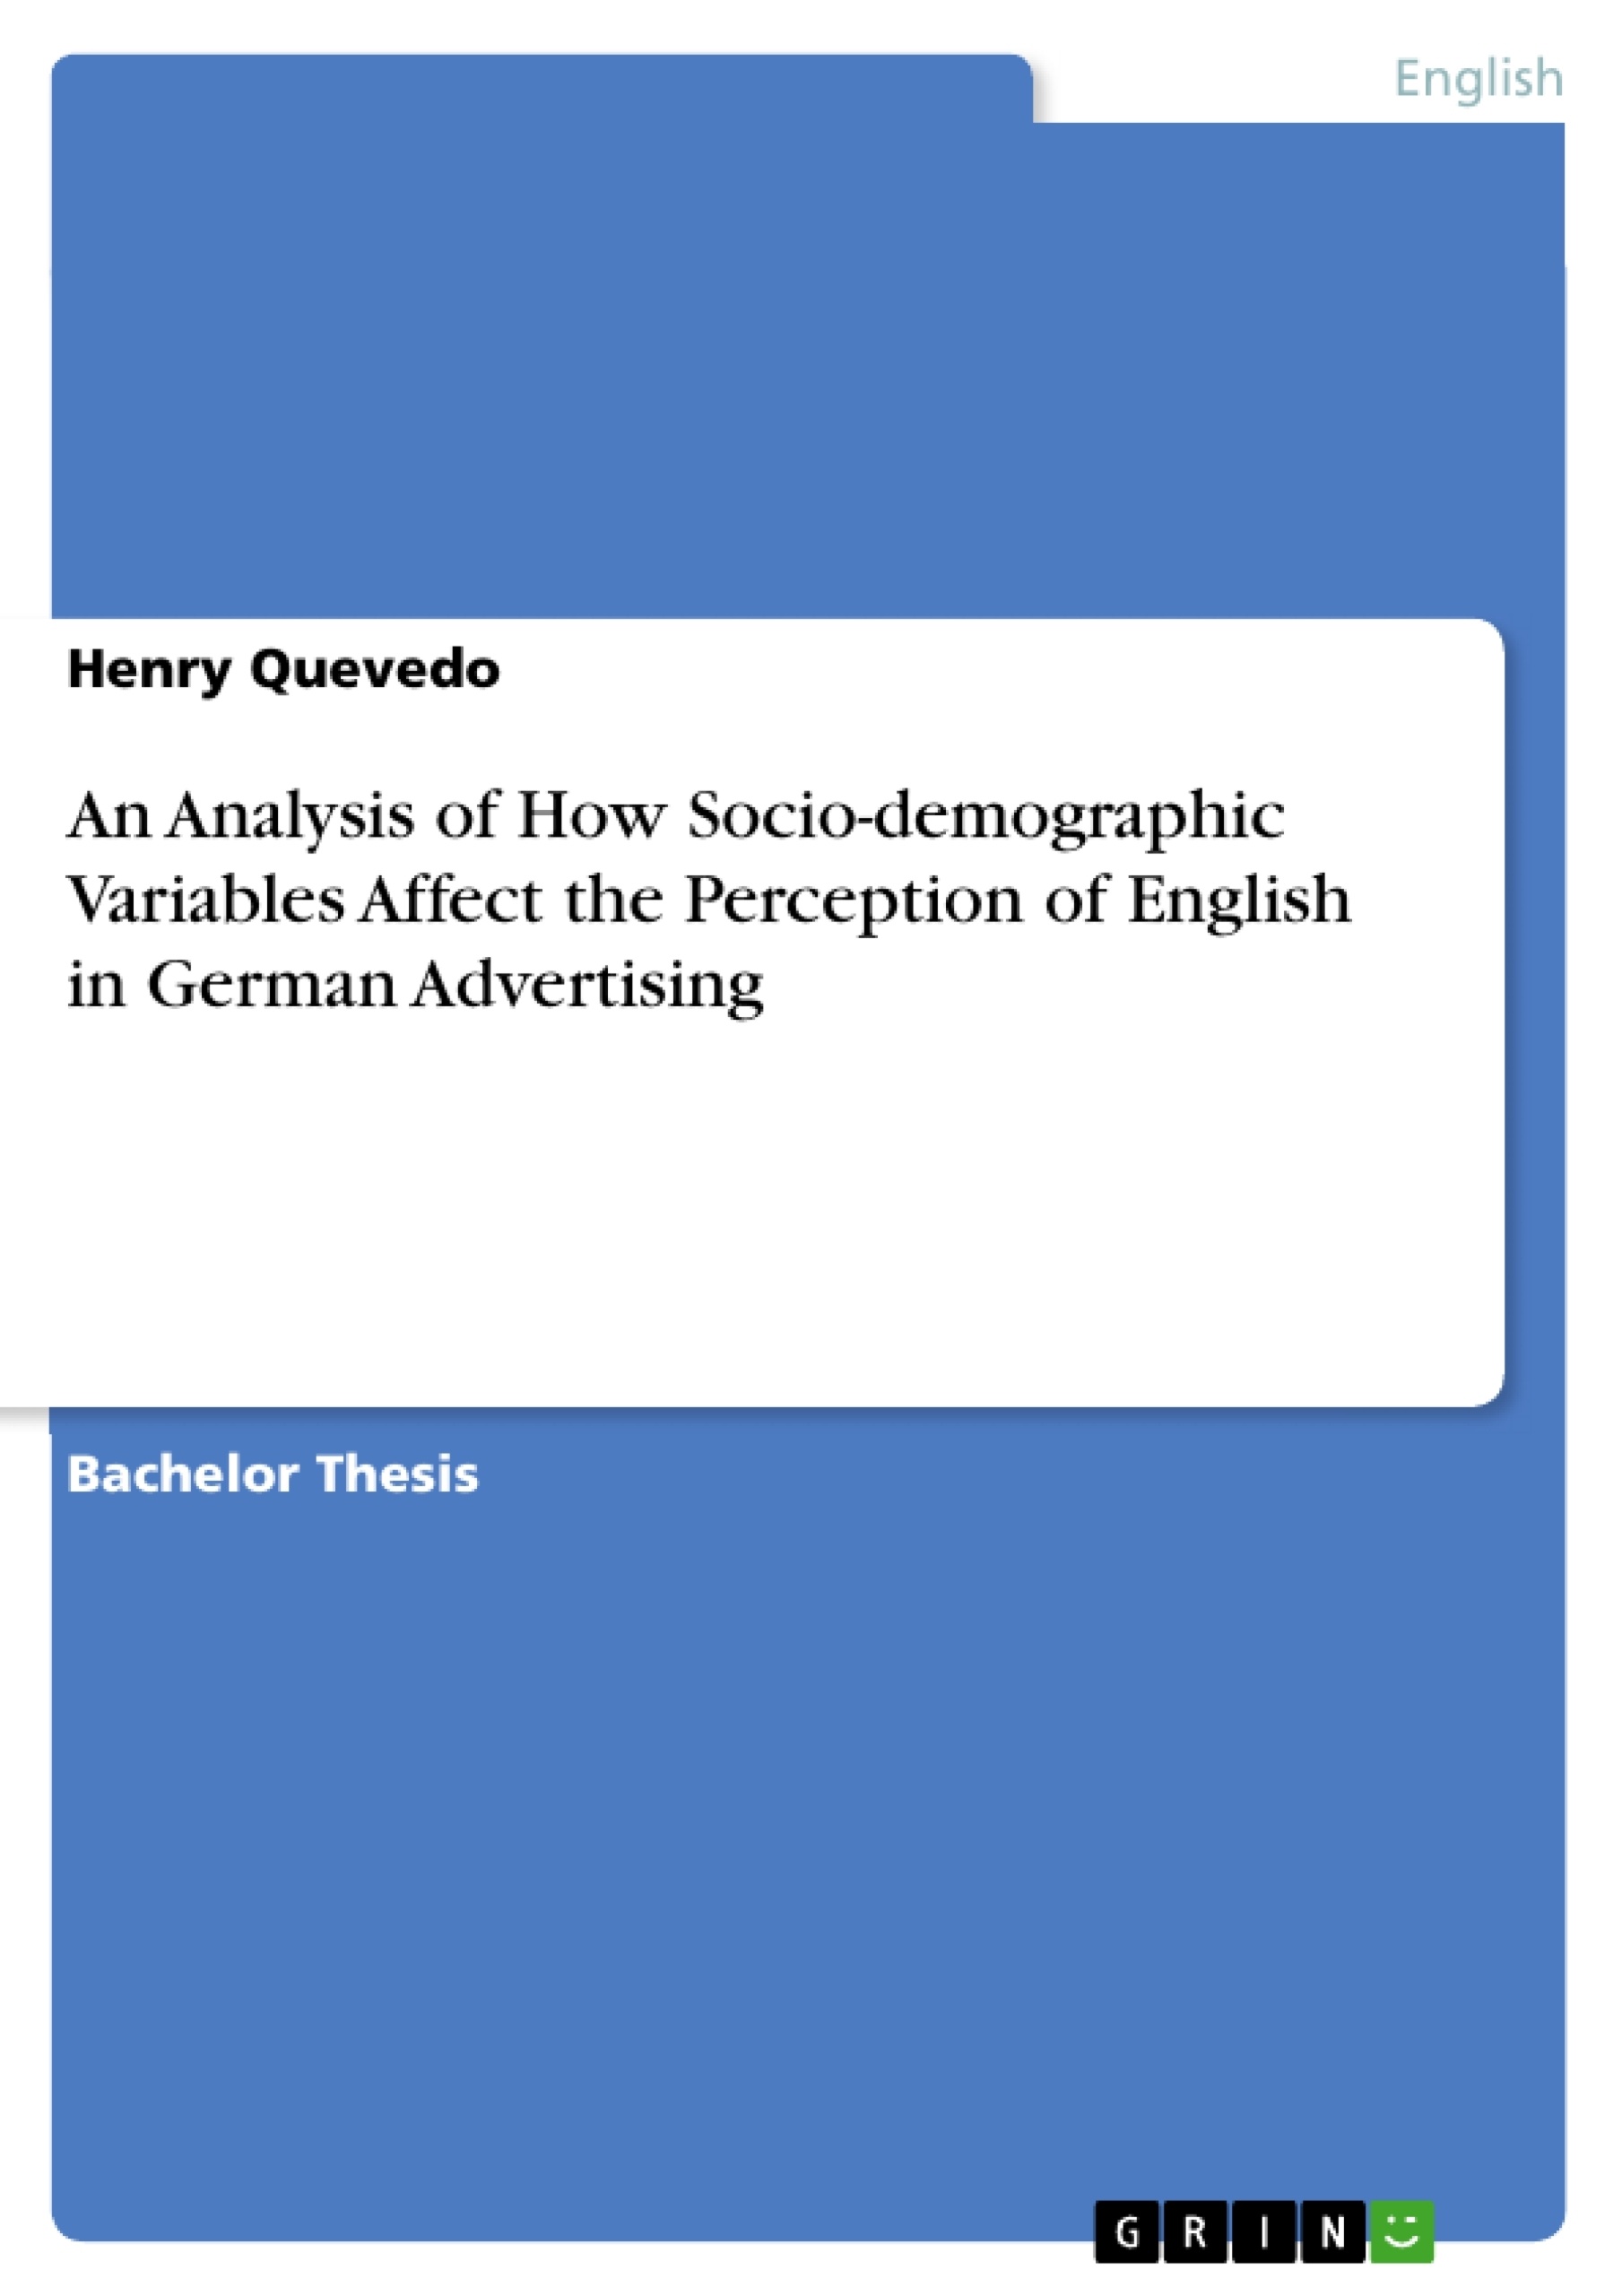 Titre: An Analysis of How Socio-demographic Variables Affect the Perception of English in German Advertising